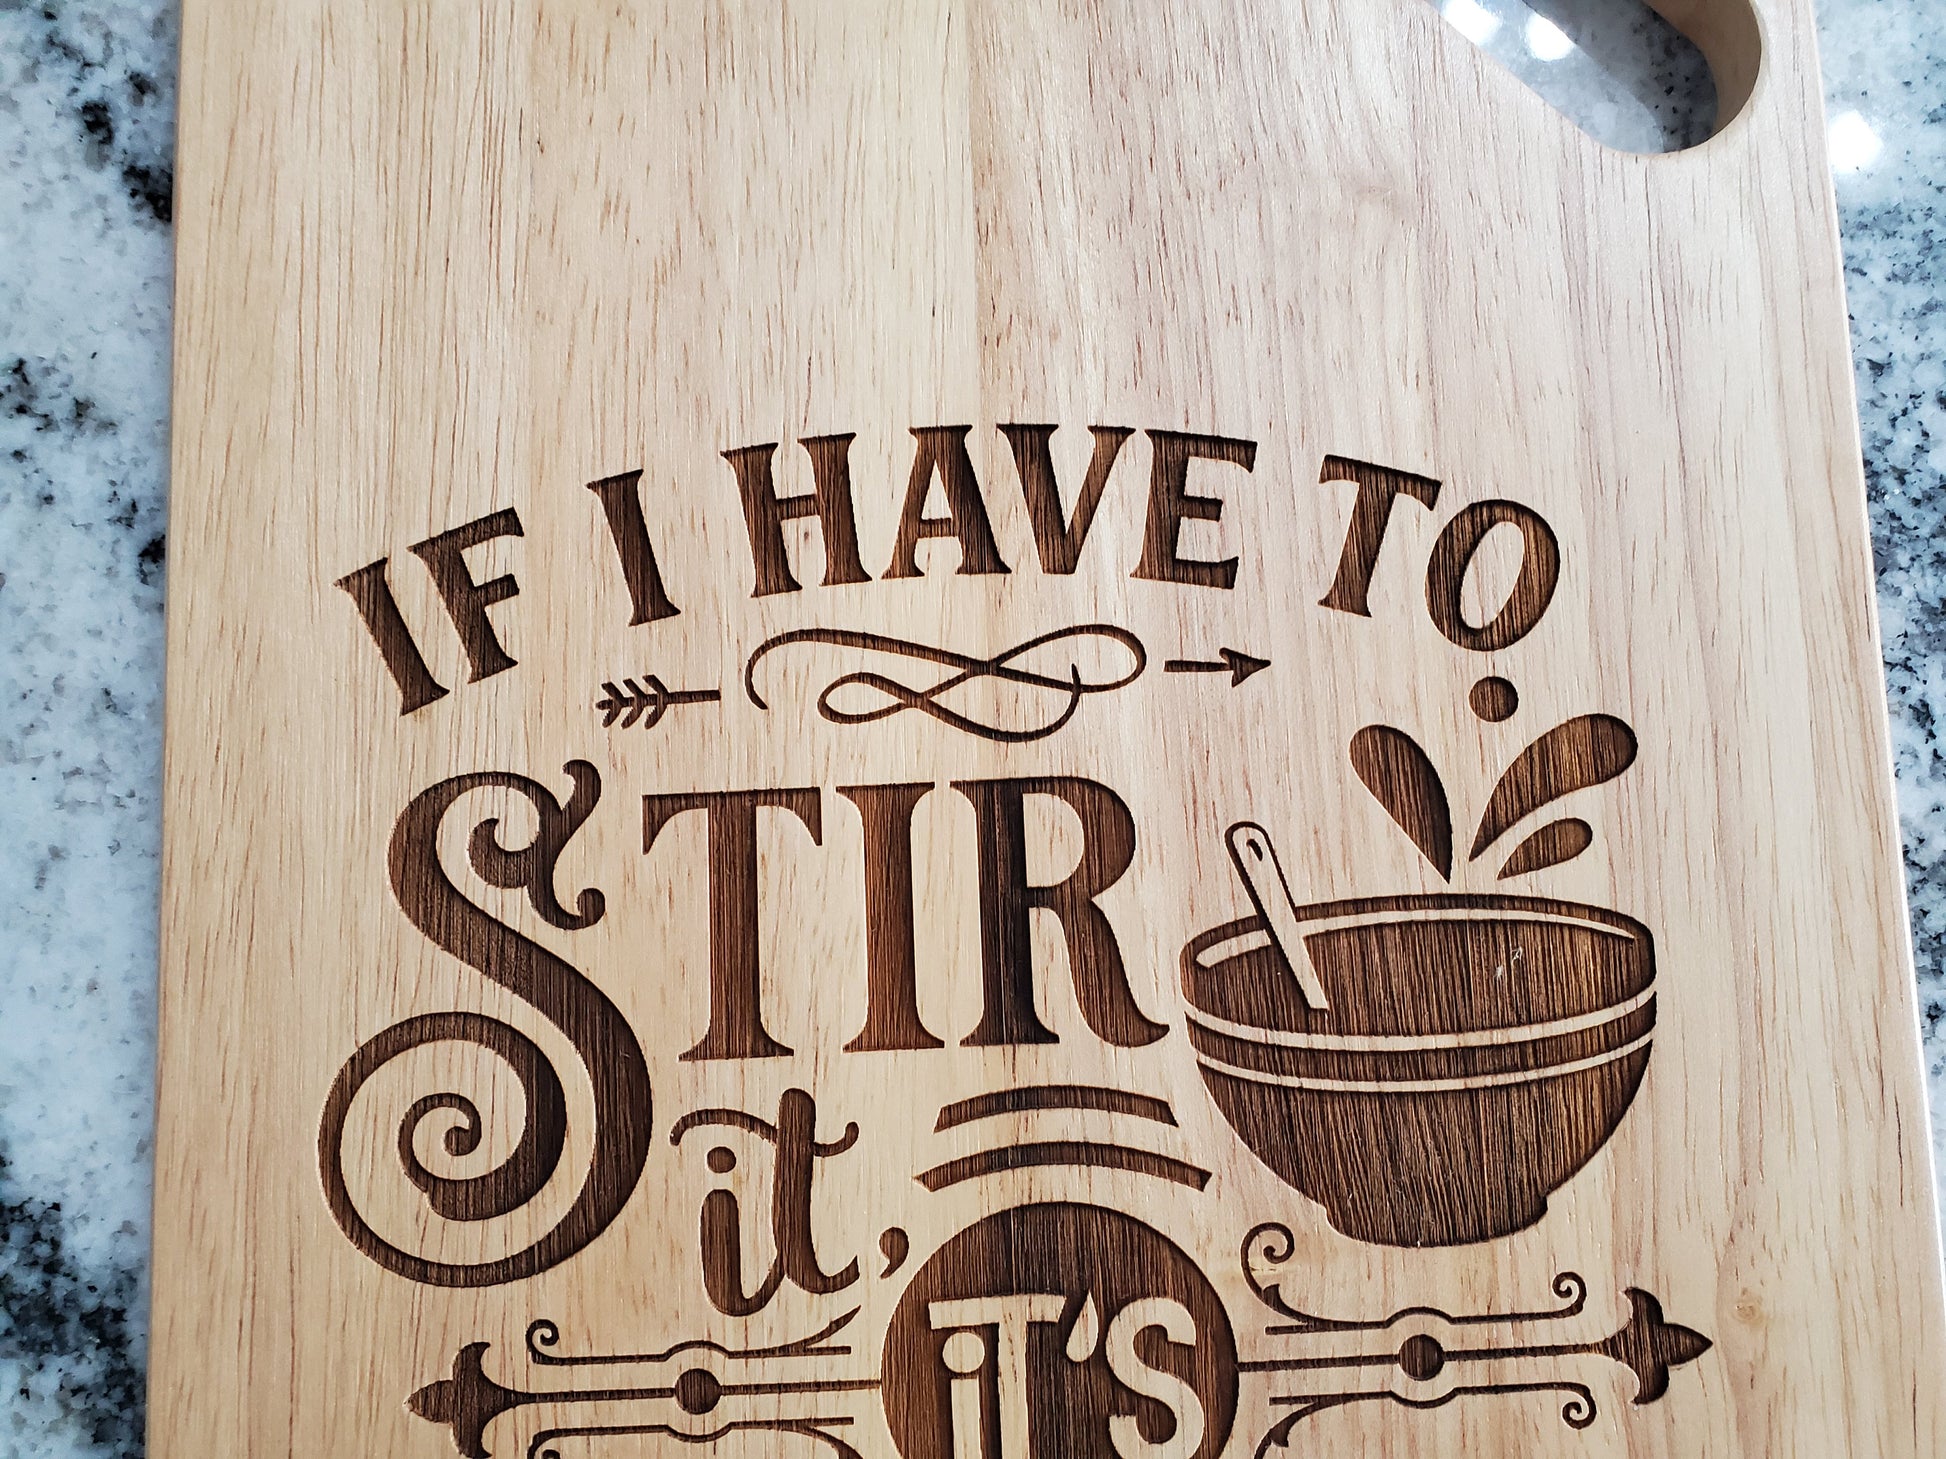 If I have To Stir It Is Homemade Funny Joke Gift Hardwood Engraved Cutting Board Wood Kitchen Accessory Bowl Mix Bake